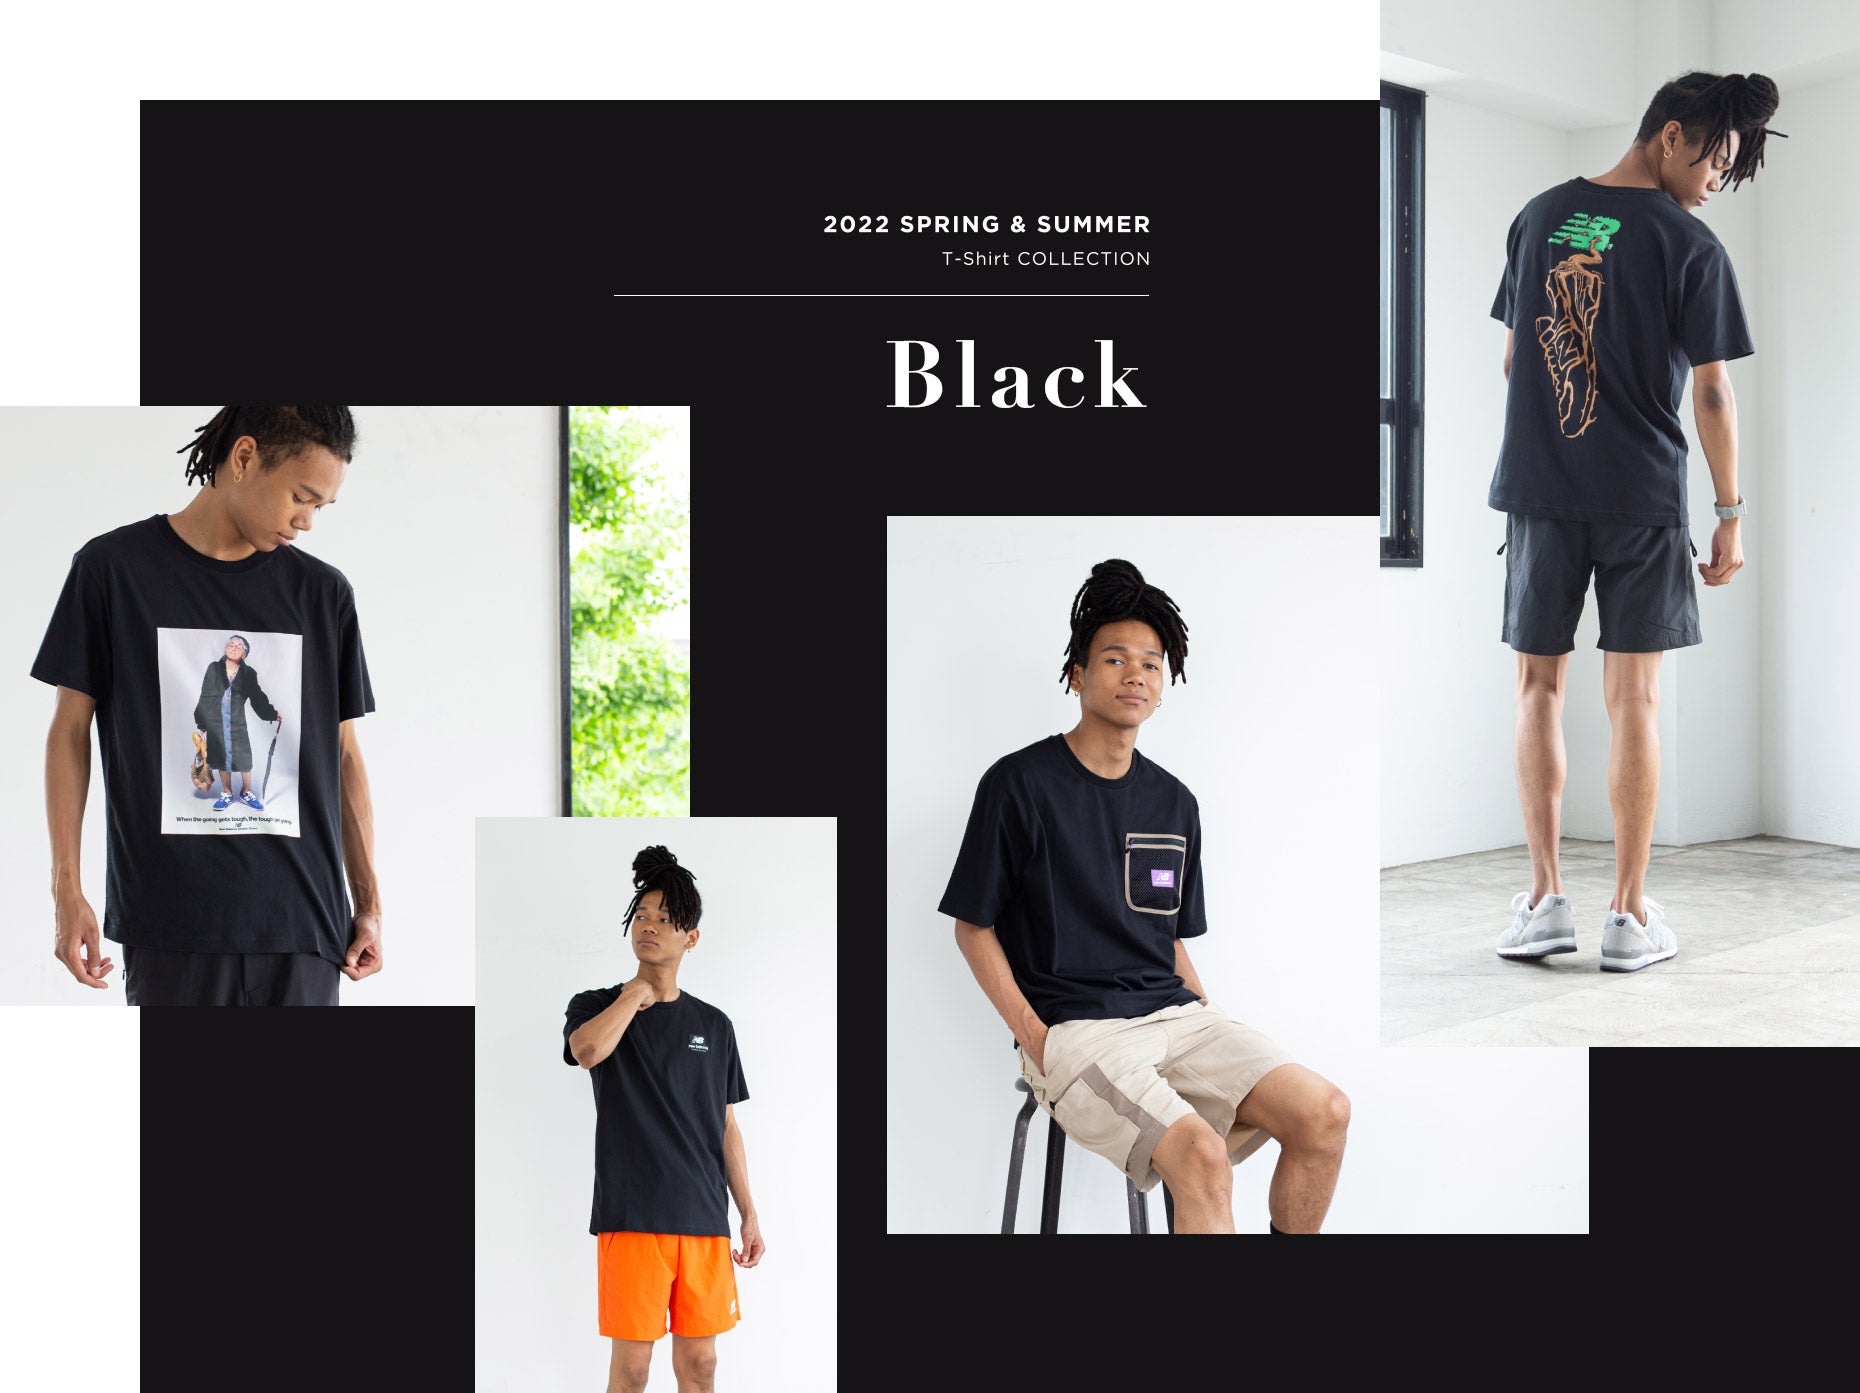 2022 Spring and Summer T-Shirt Collection, Black